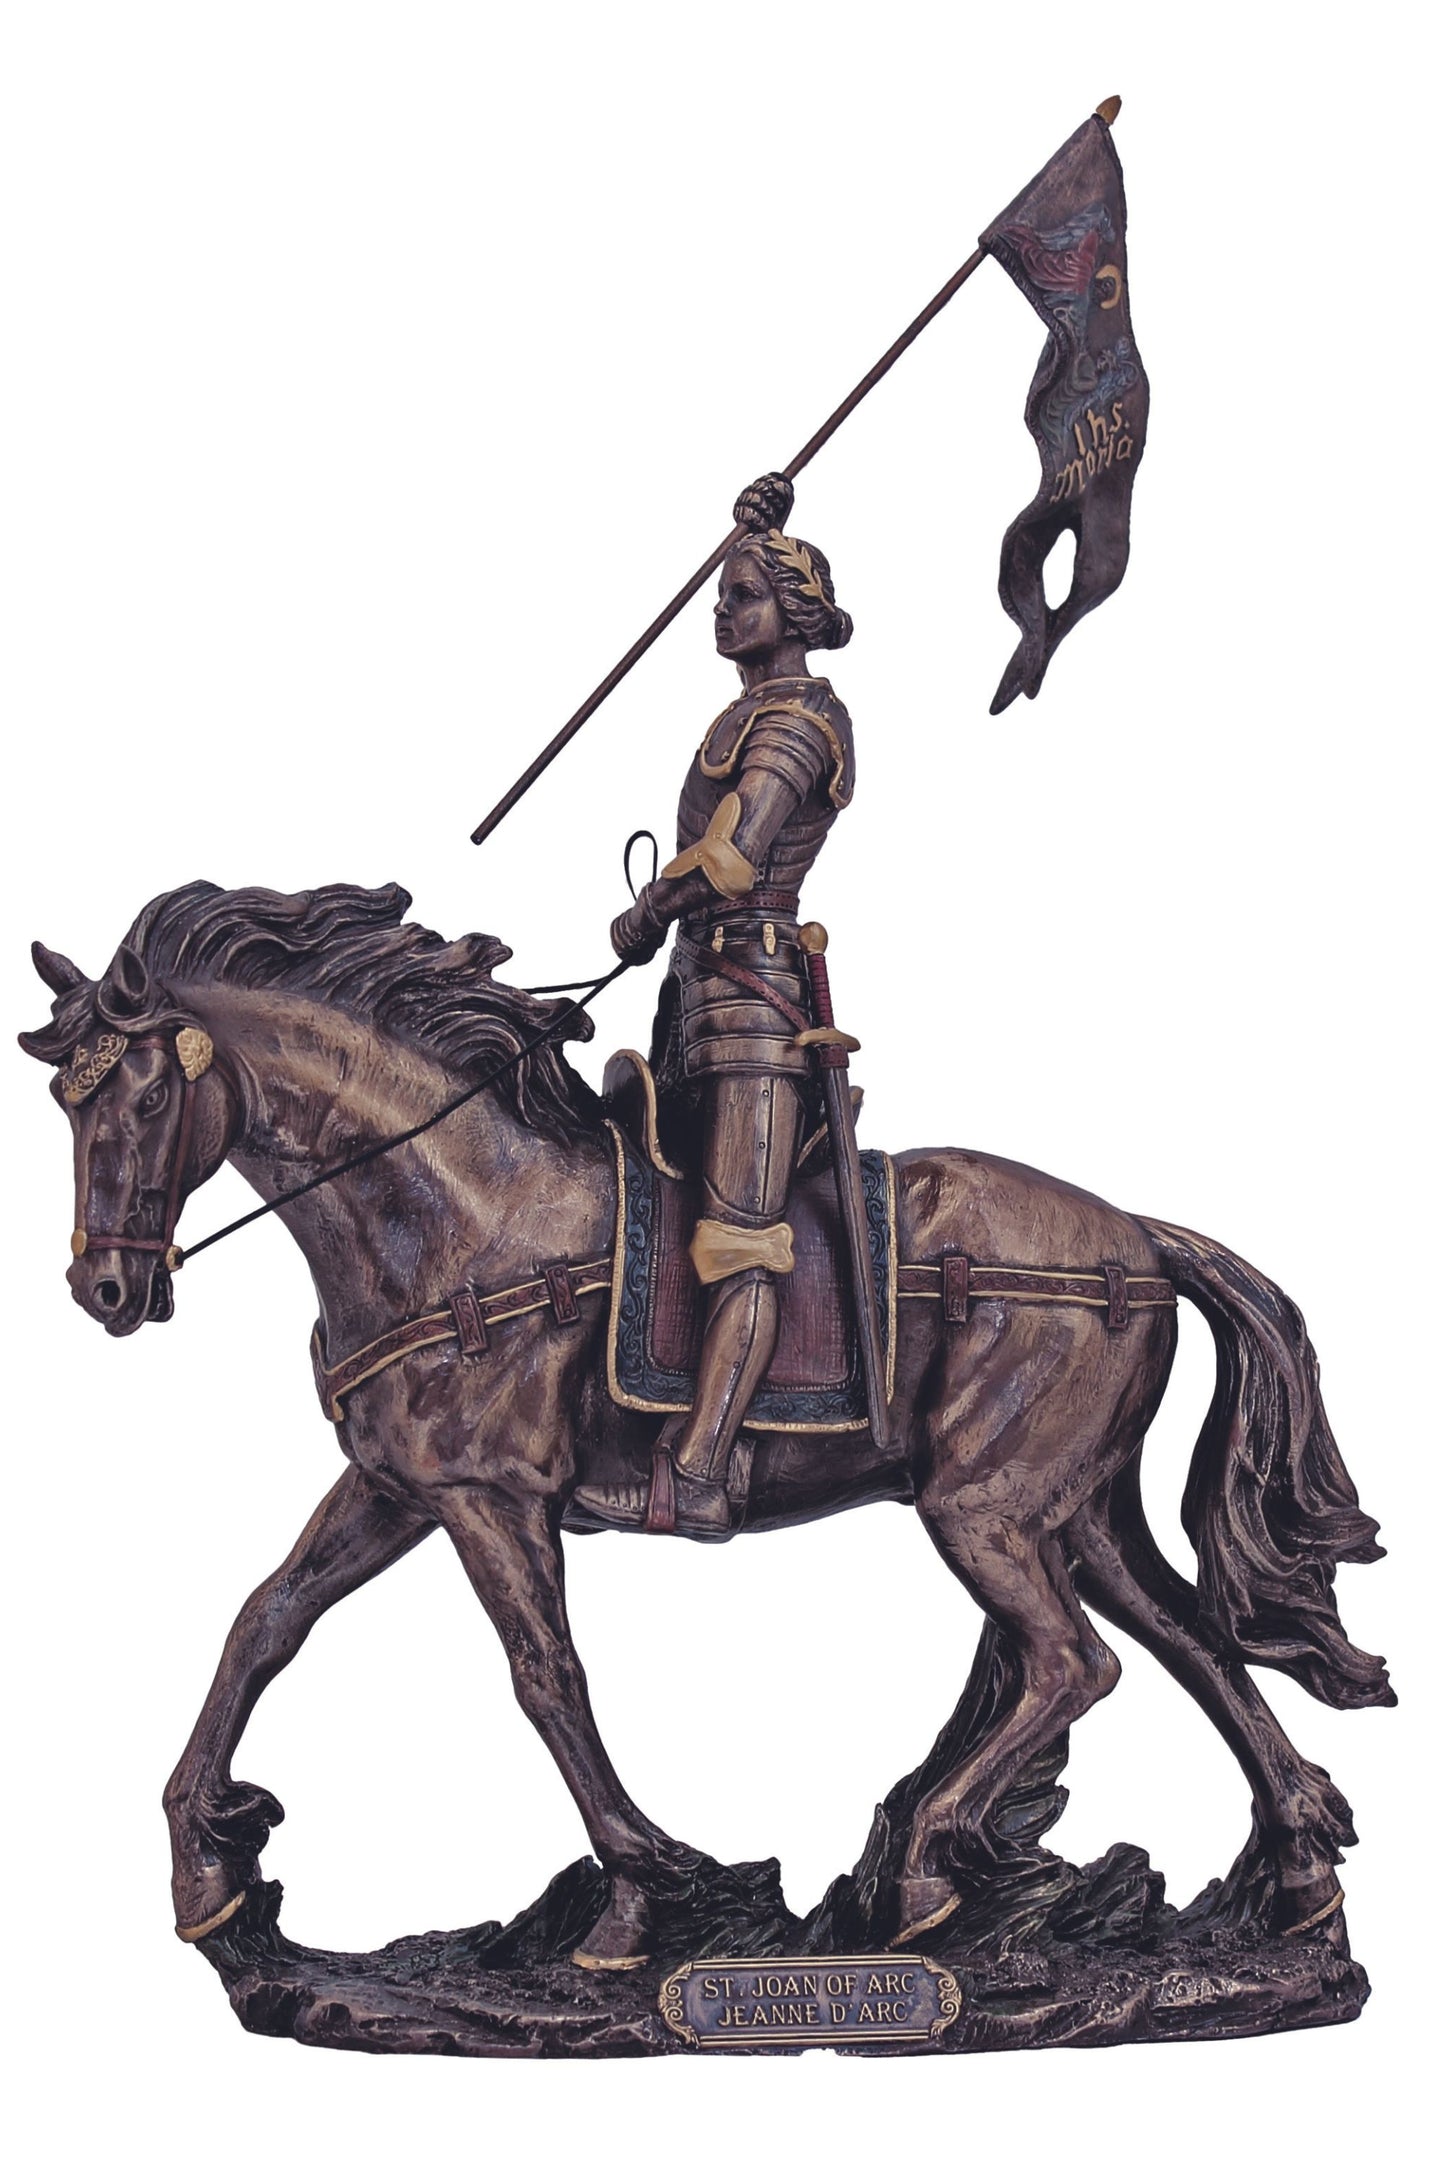 SR-76003 St. Joan of Arc in Cold Cast Bronze 10x11"